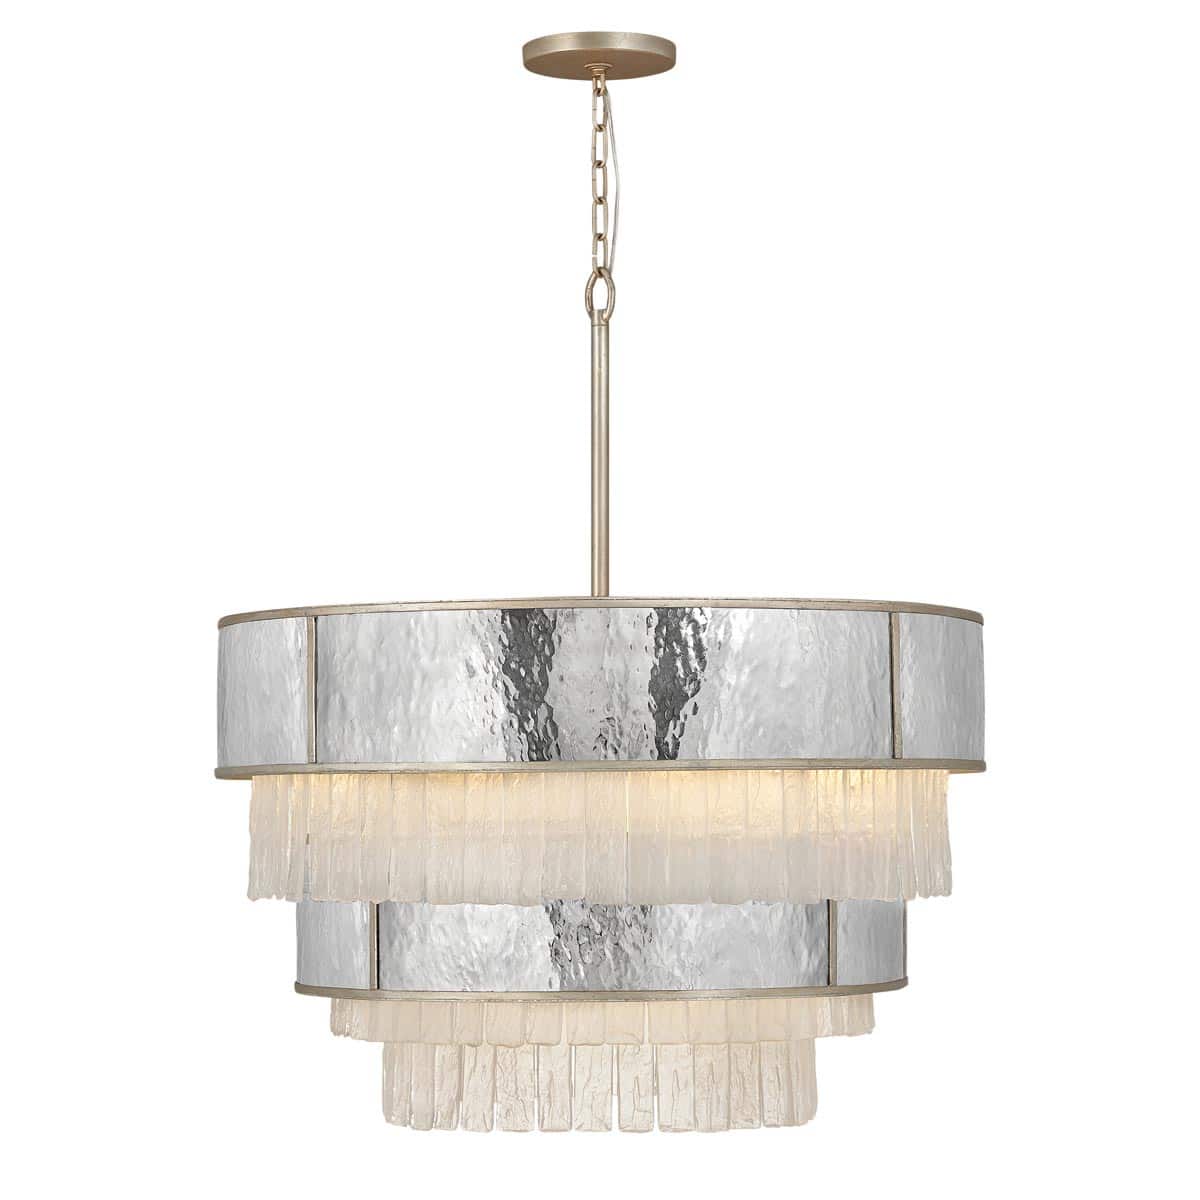 Quintiesse Reverie 12 Light Large Chandelier Stainless Textured Glass